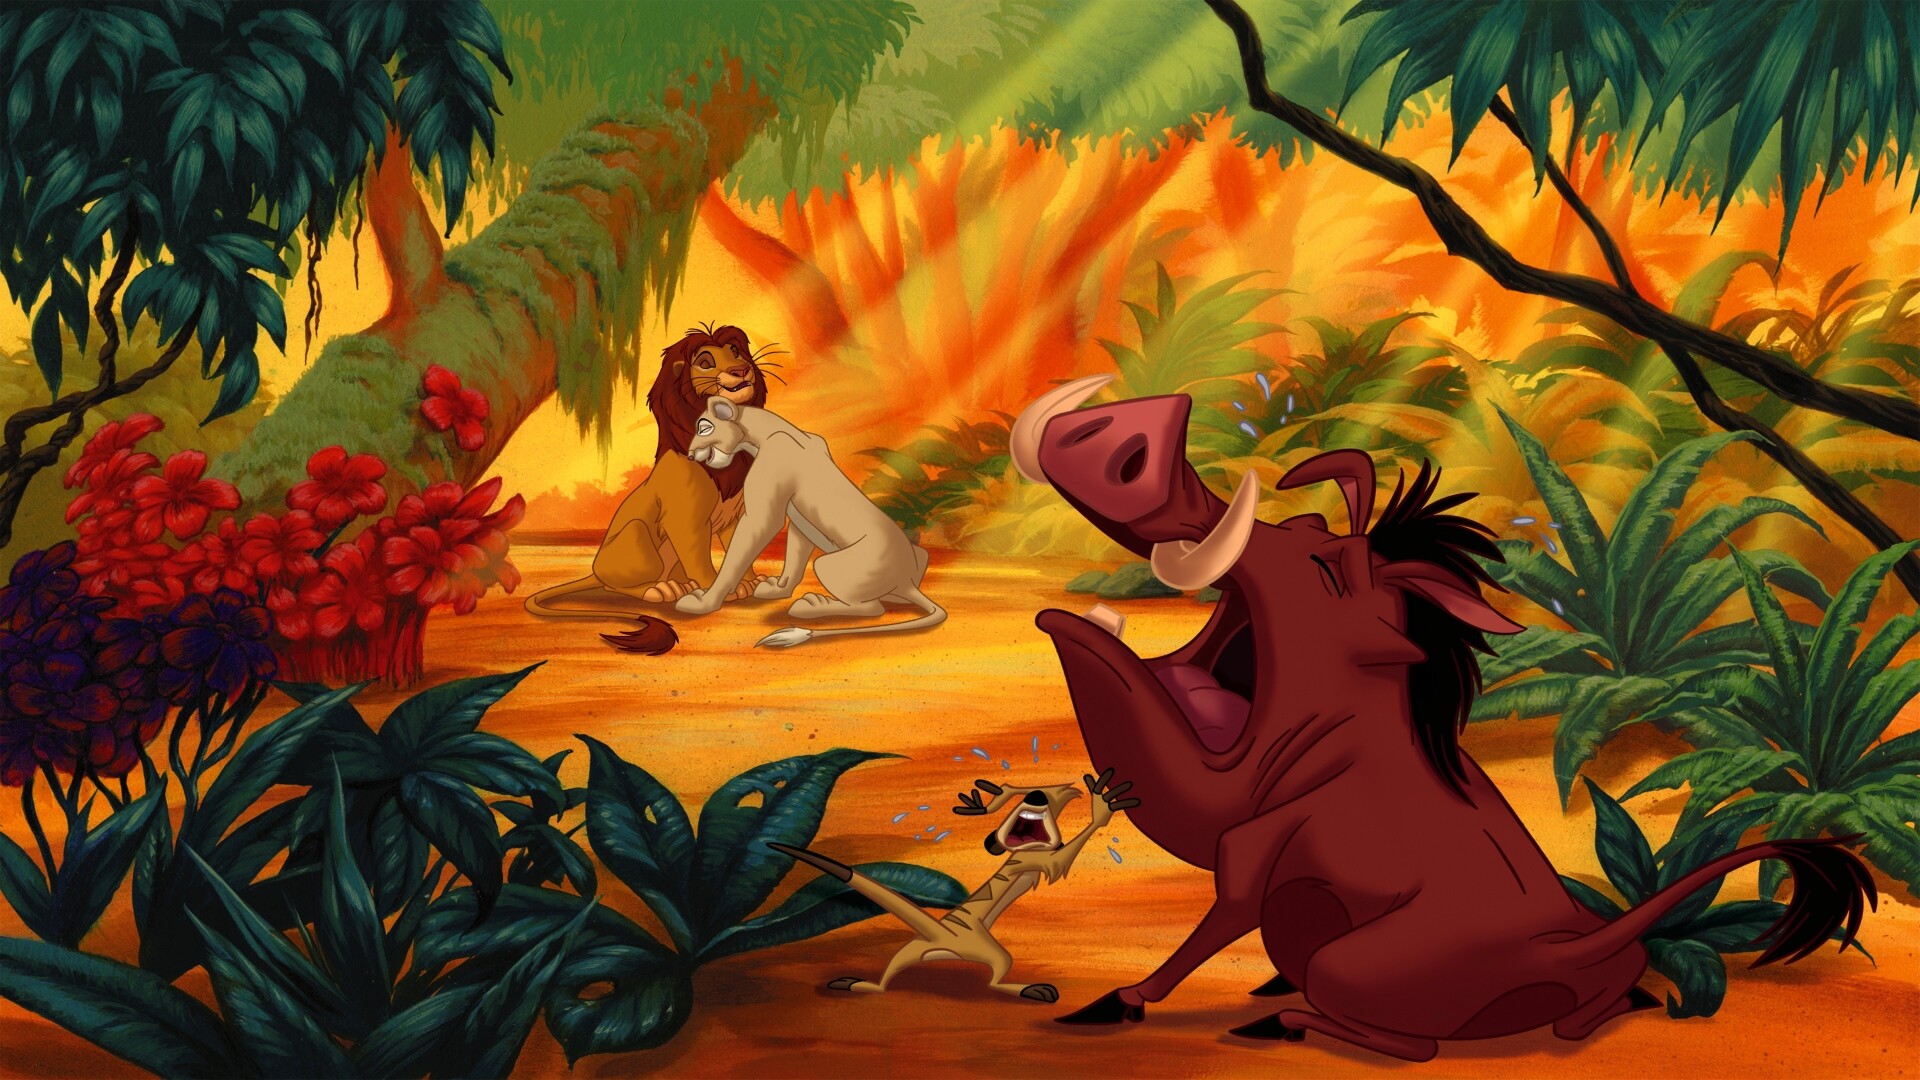 The Lion King: Timon and Pumbaa, A meerkat and warthog, Simba's best friends. 1920x1080 Full HD Background.